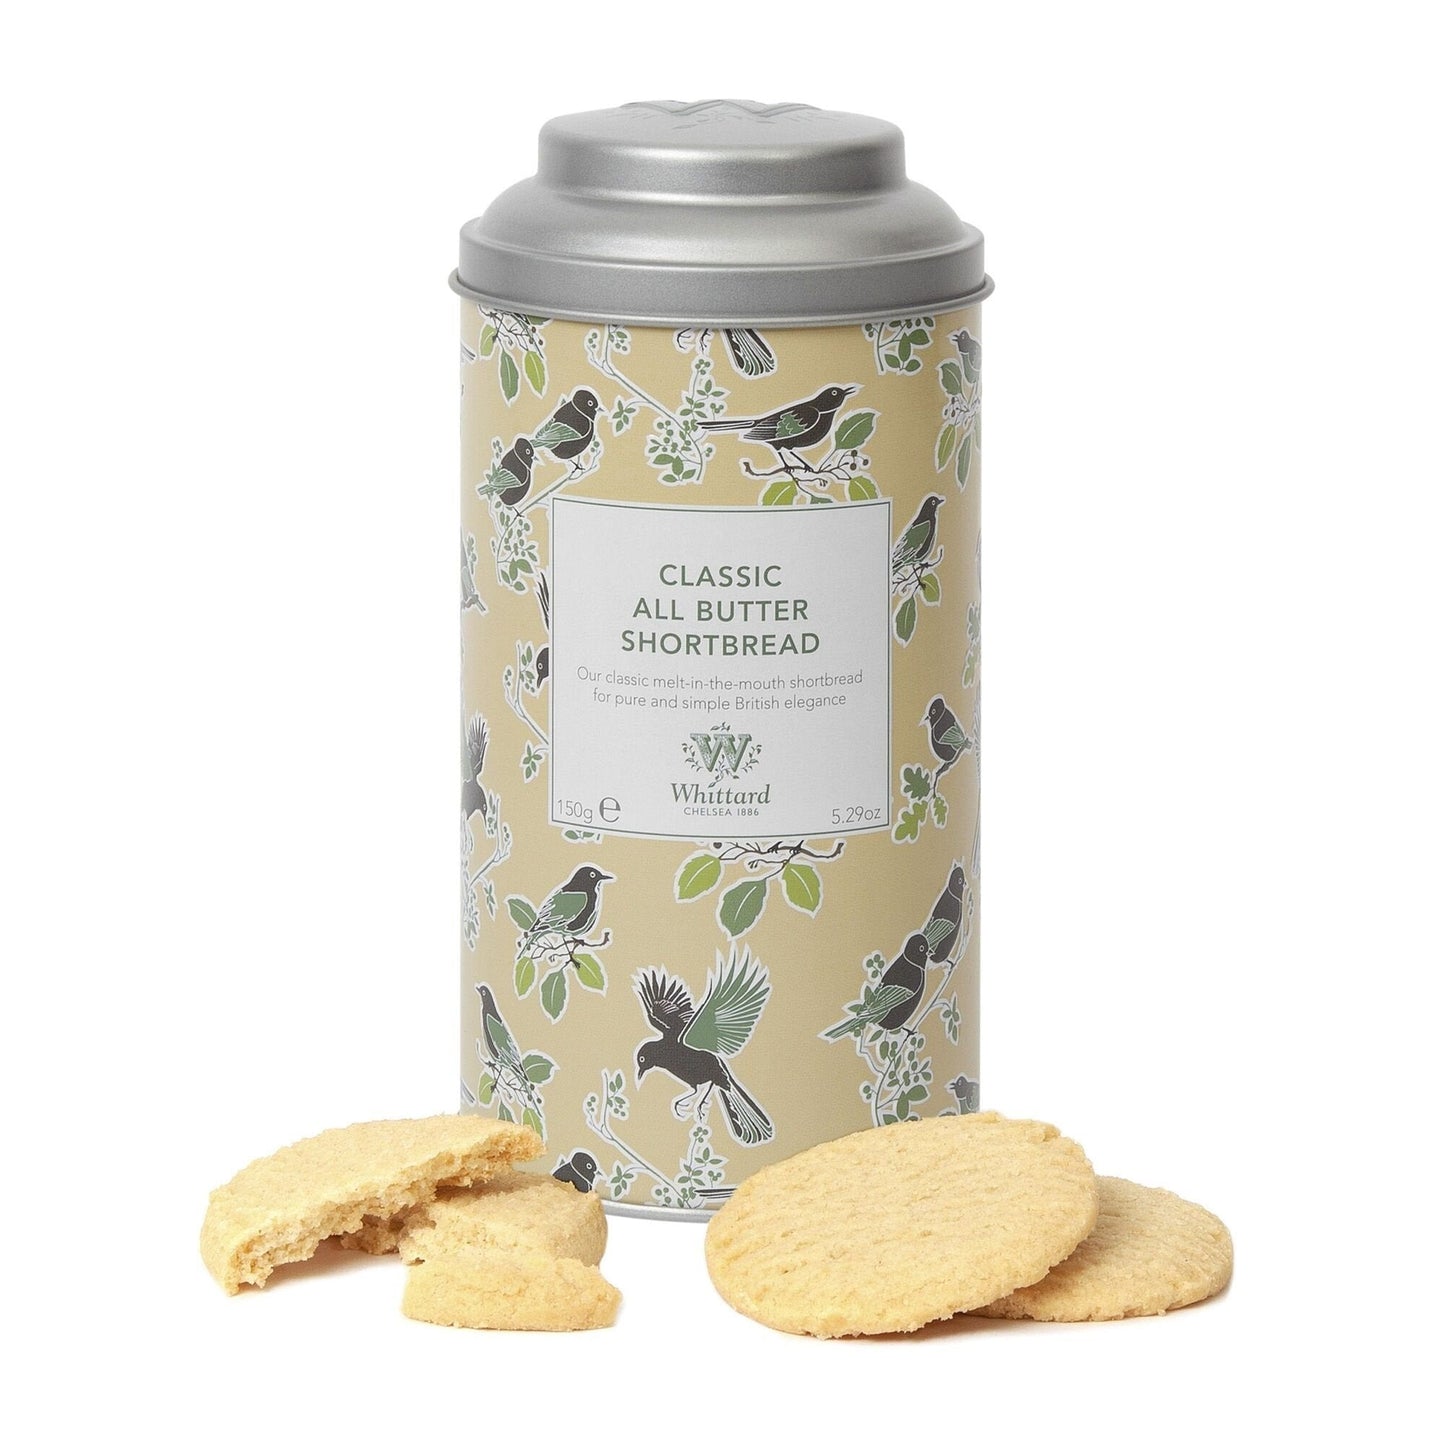 Tea Discoveries Classic All Butter Shortbread Biscuits